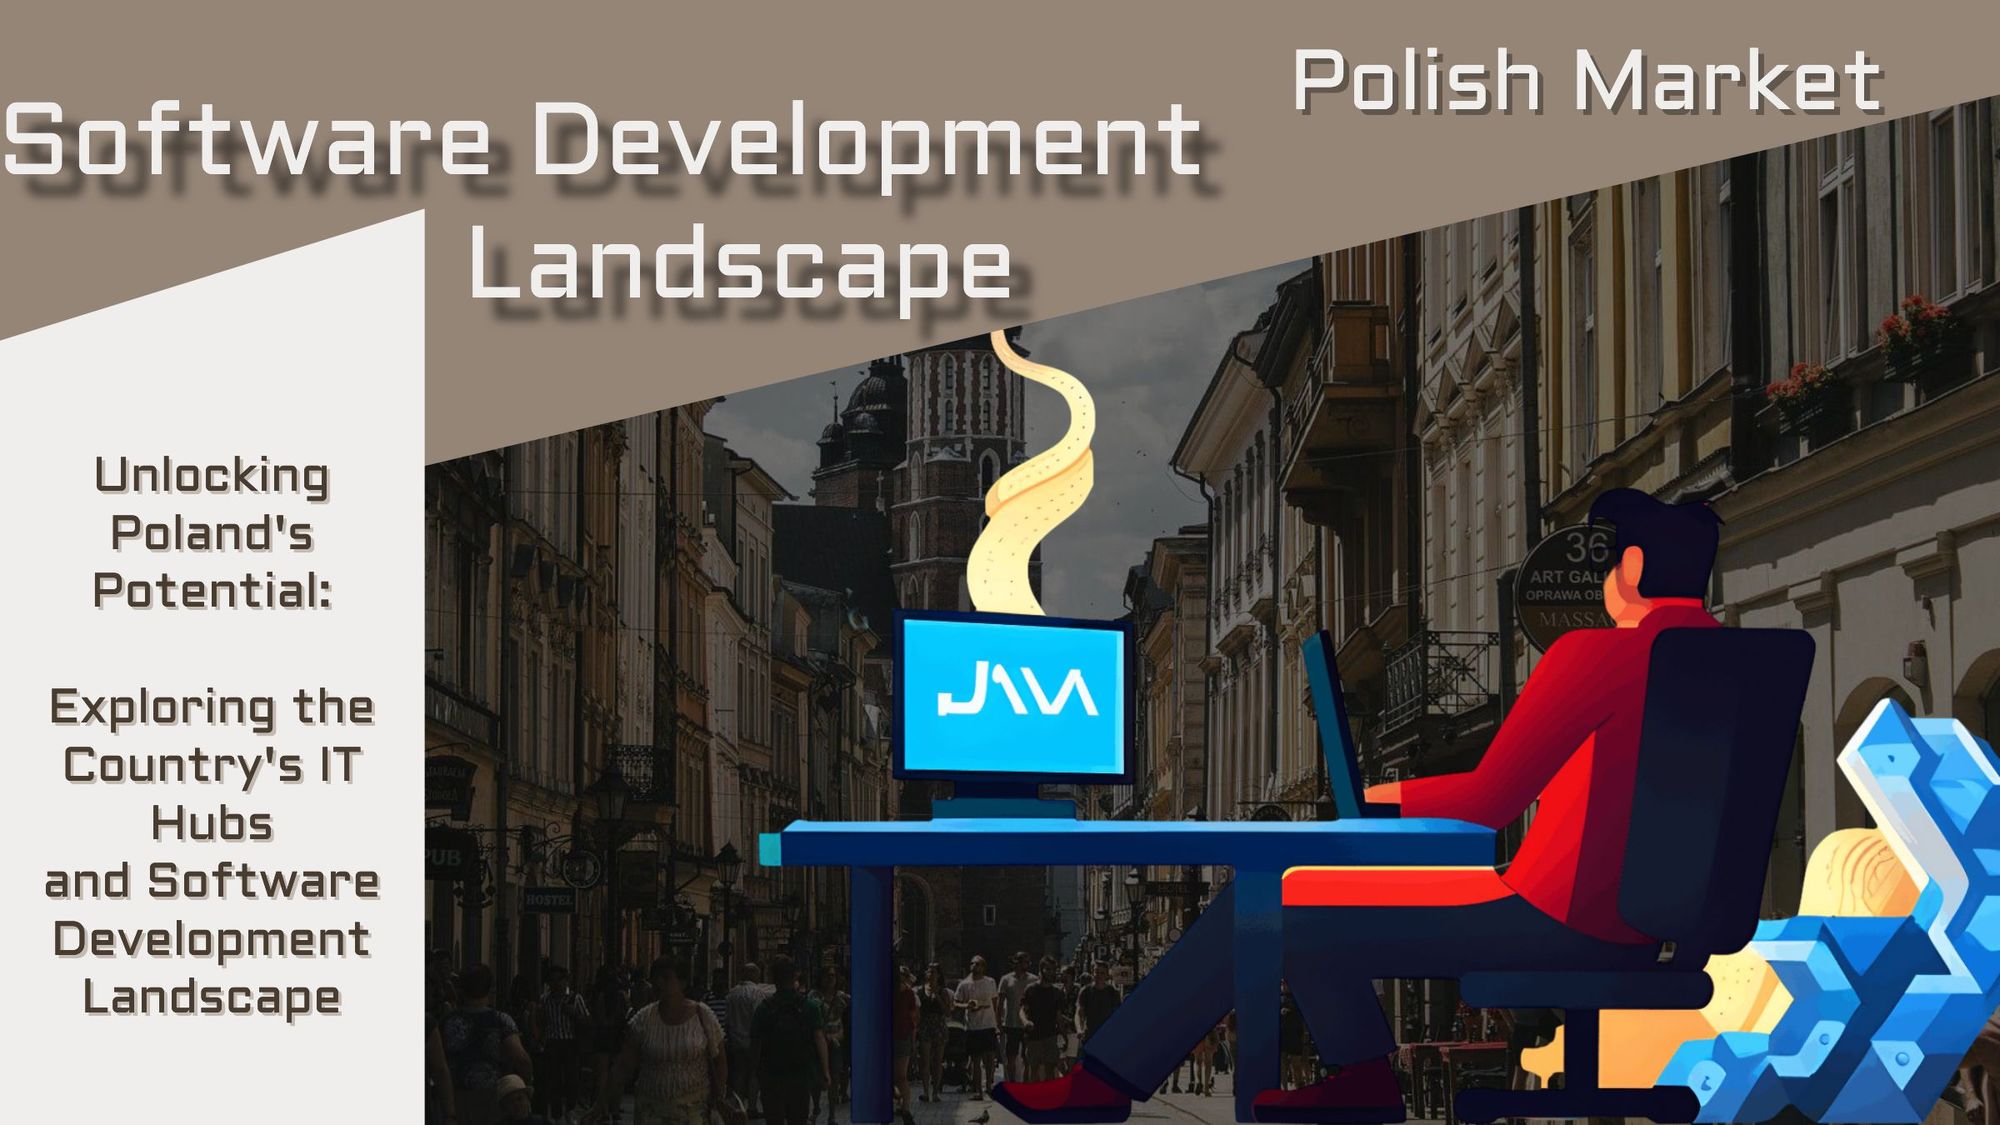 Unlocking Poland's Software Development Potential: Exploring the Country's IT Hubs